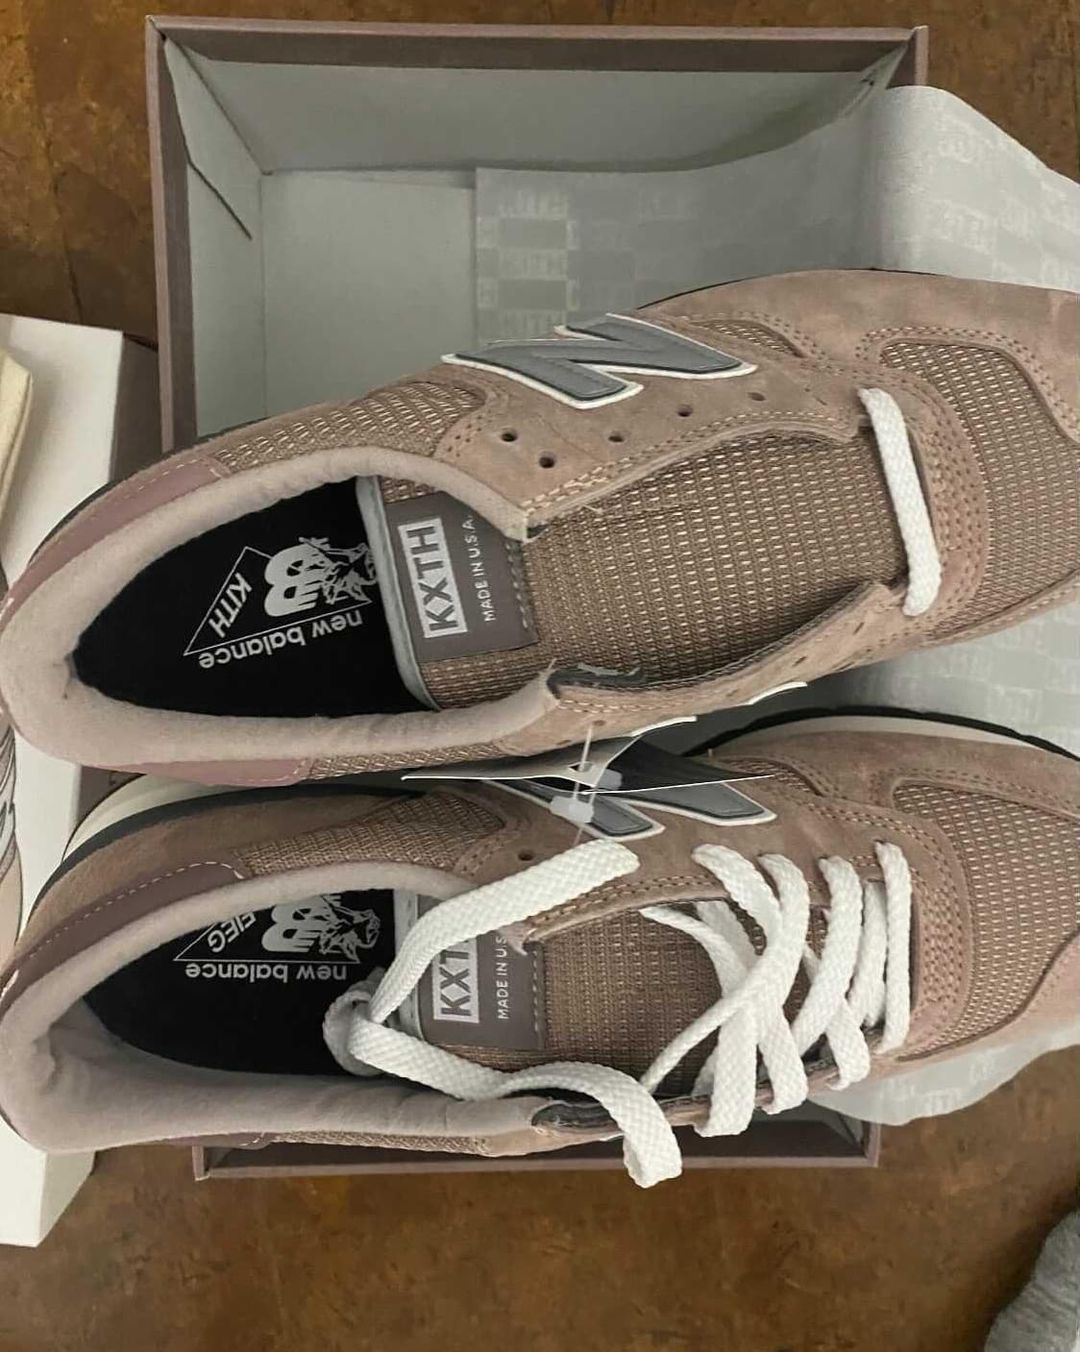 Kith Ronnie Fieg will be releasing an upcoming M990KT1 Release Date